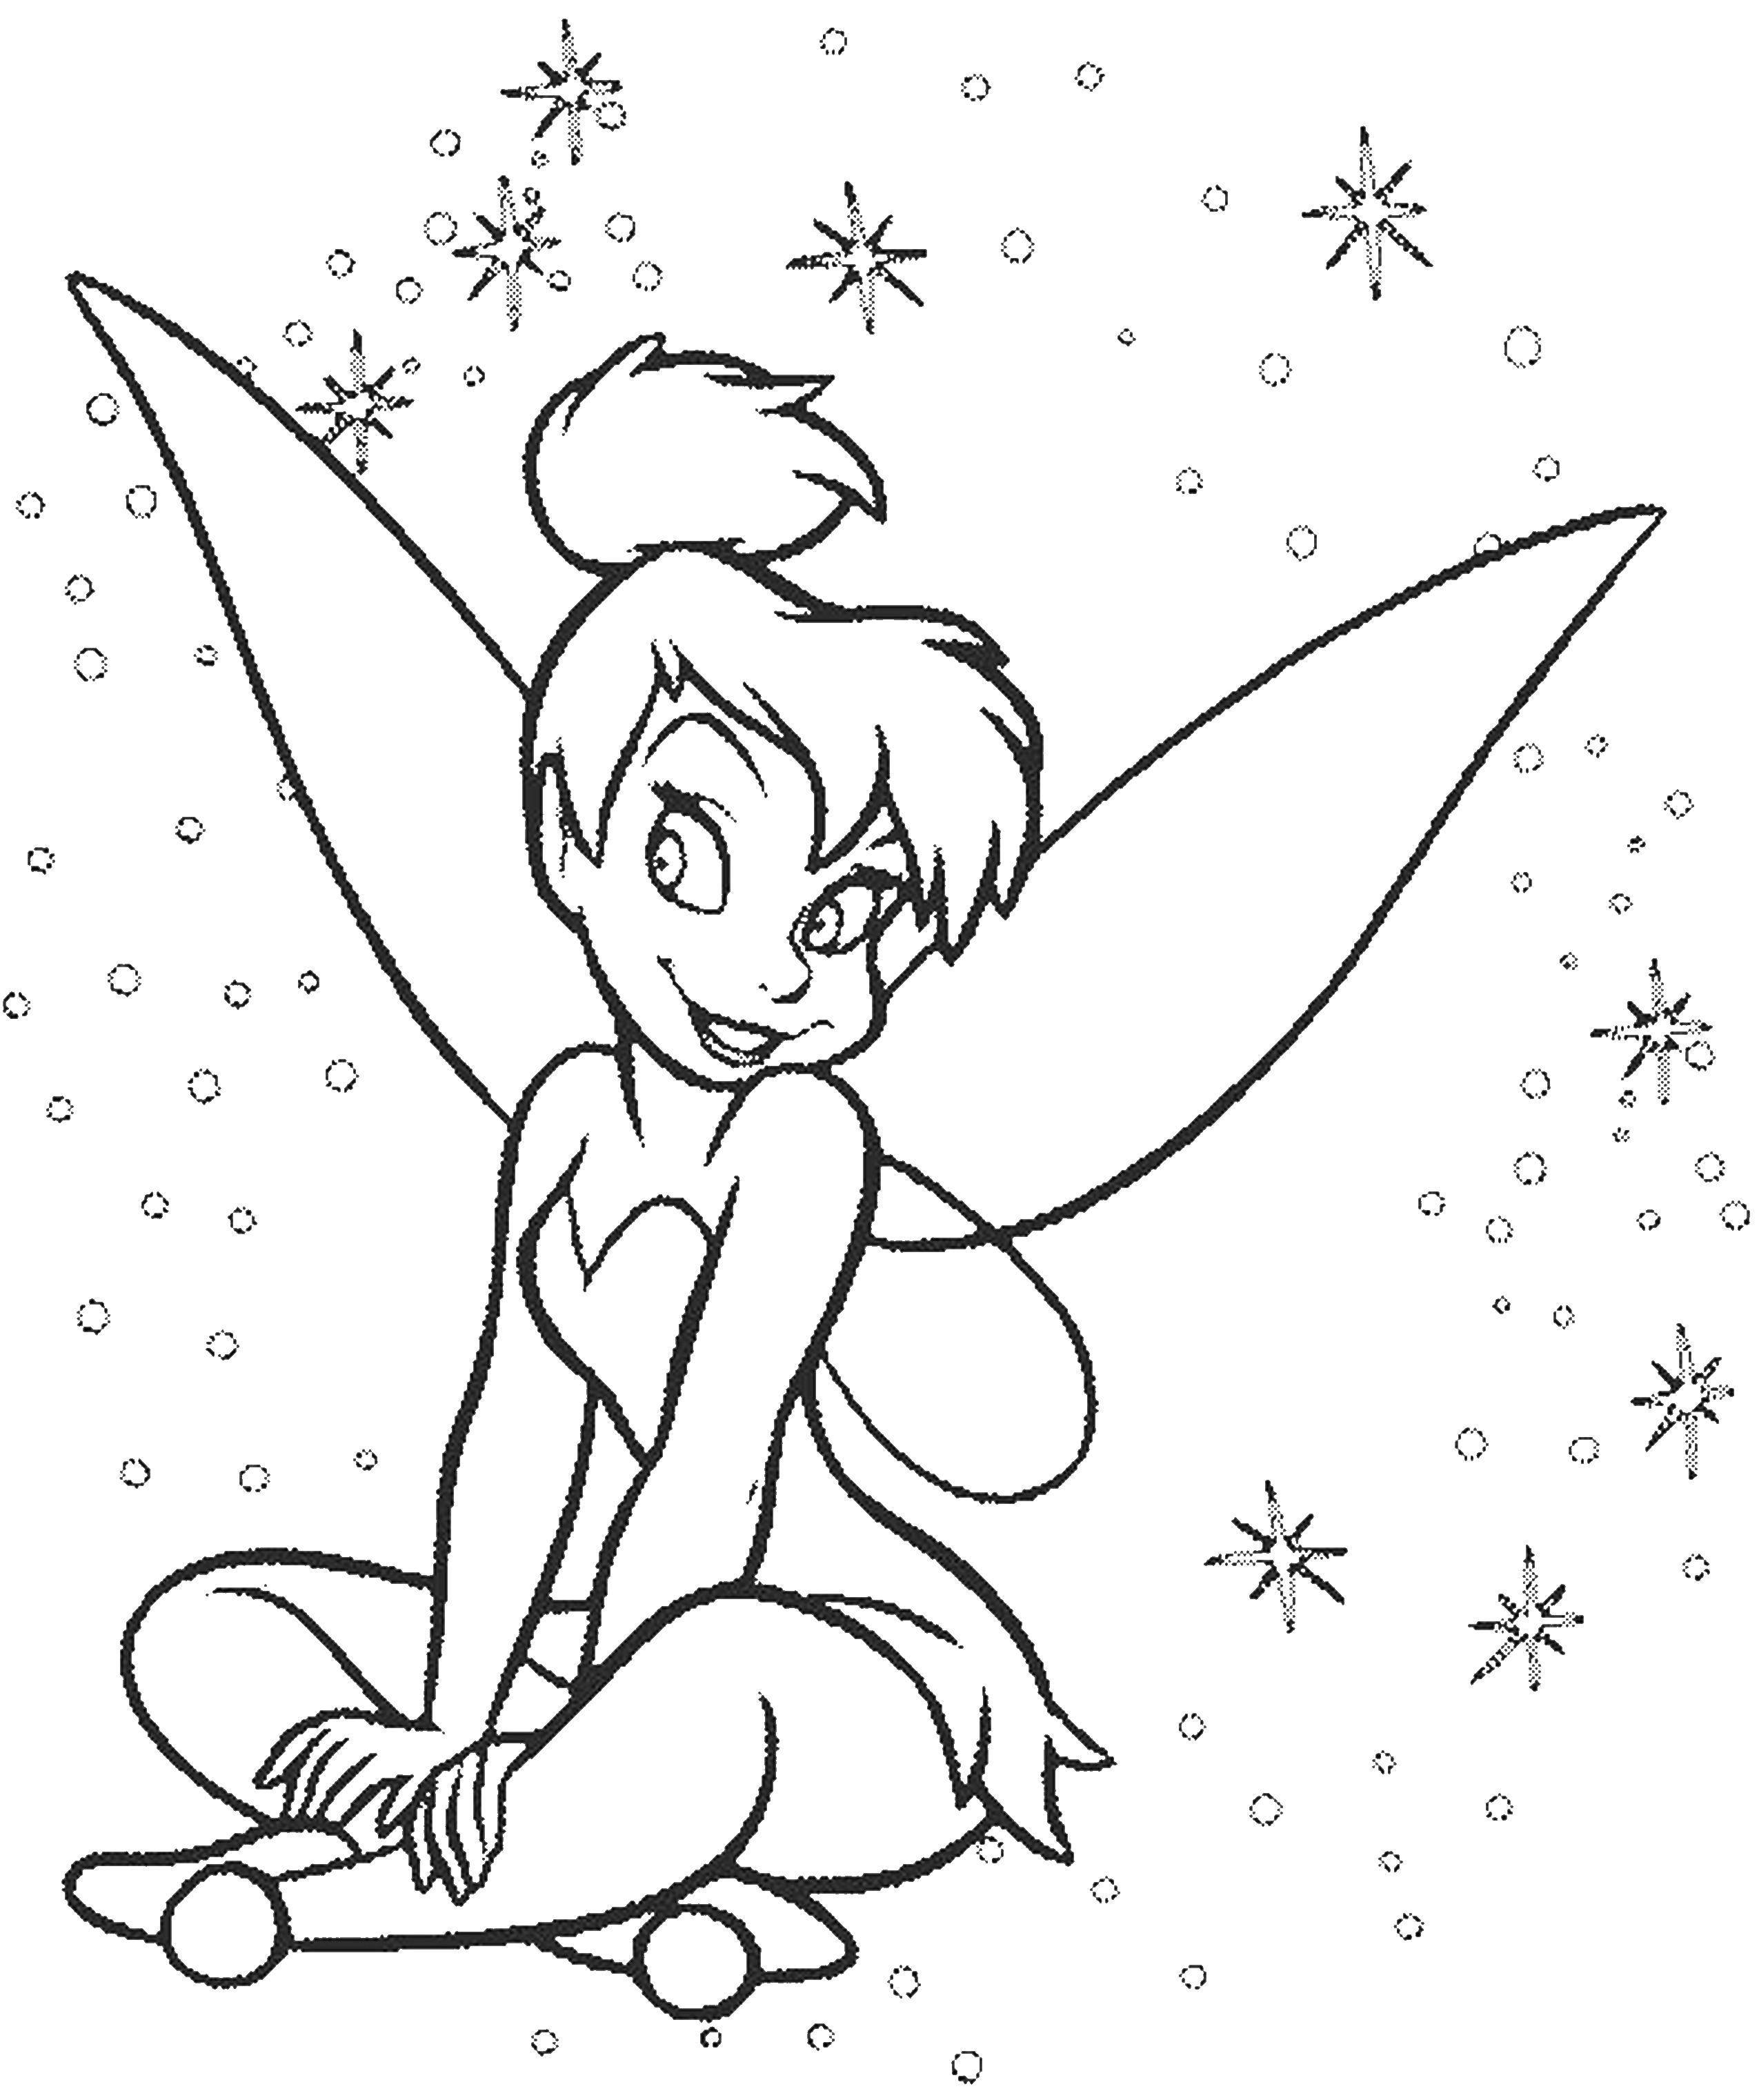 Coloring Sneaky fairy. Category fairies. Tags:  fairy, cunning.